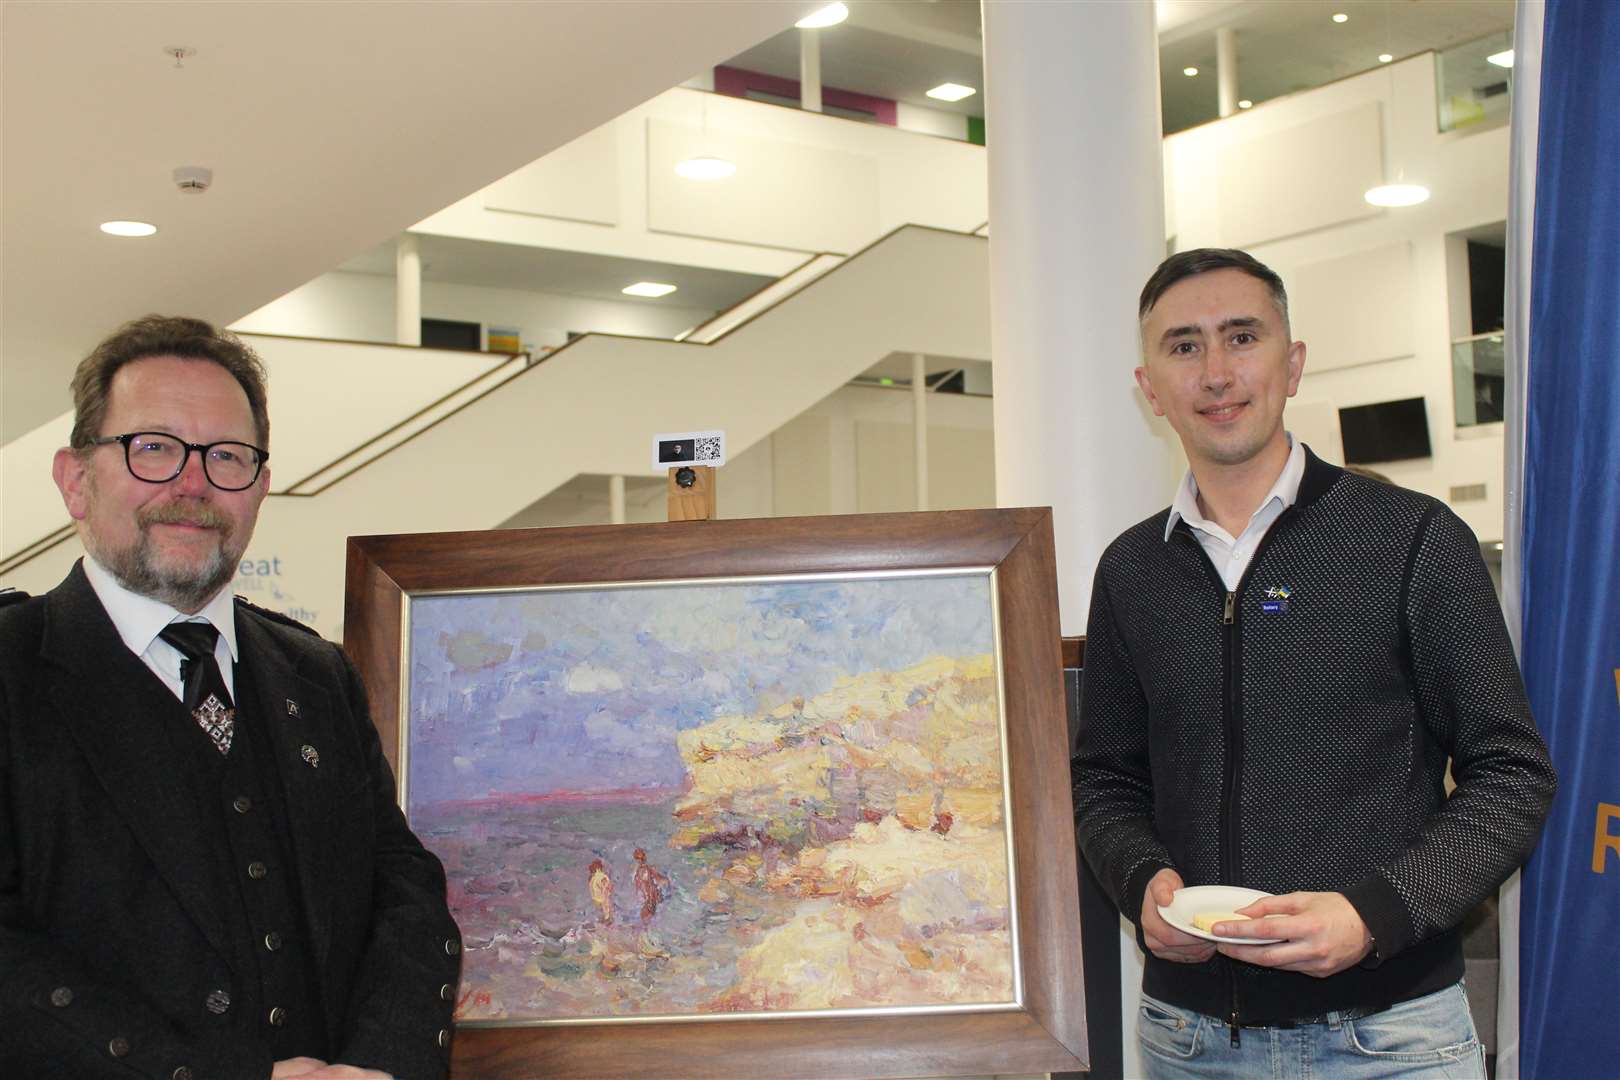 Councillor Neil Baillie admires a painting of the Crimea with art promoter Mykola Zinchenko at Monday's Ukraine-Scotland social evening at Inverurie communuty campus.